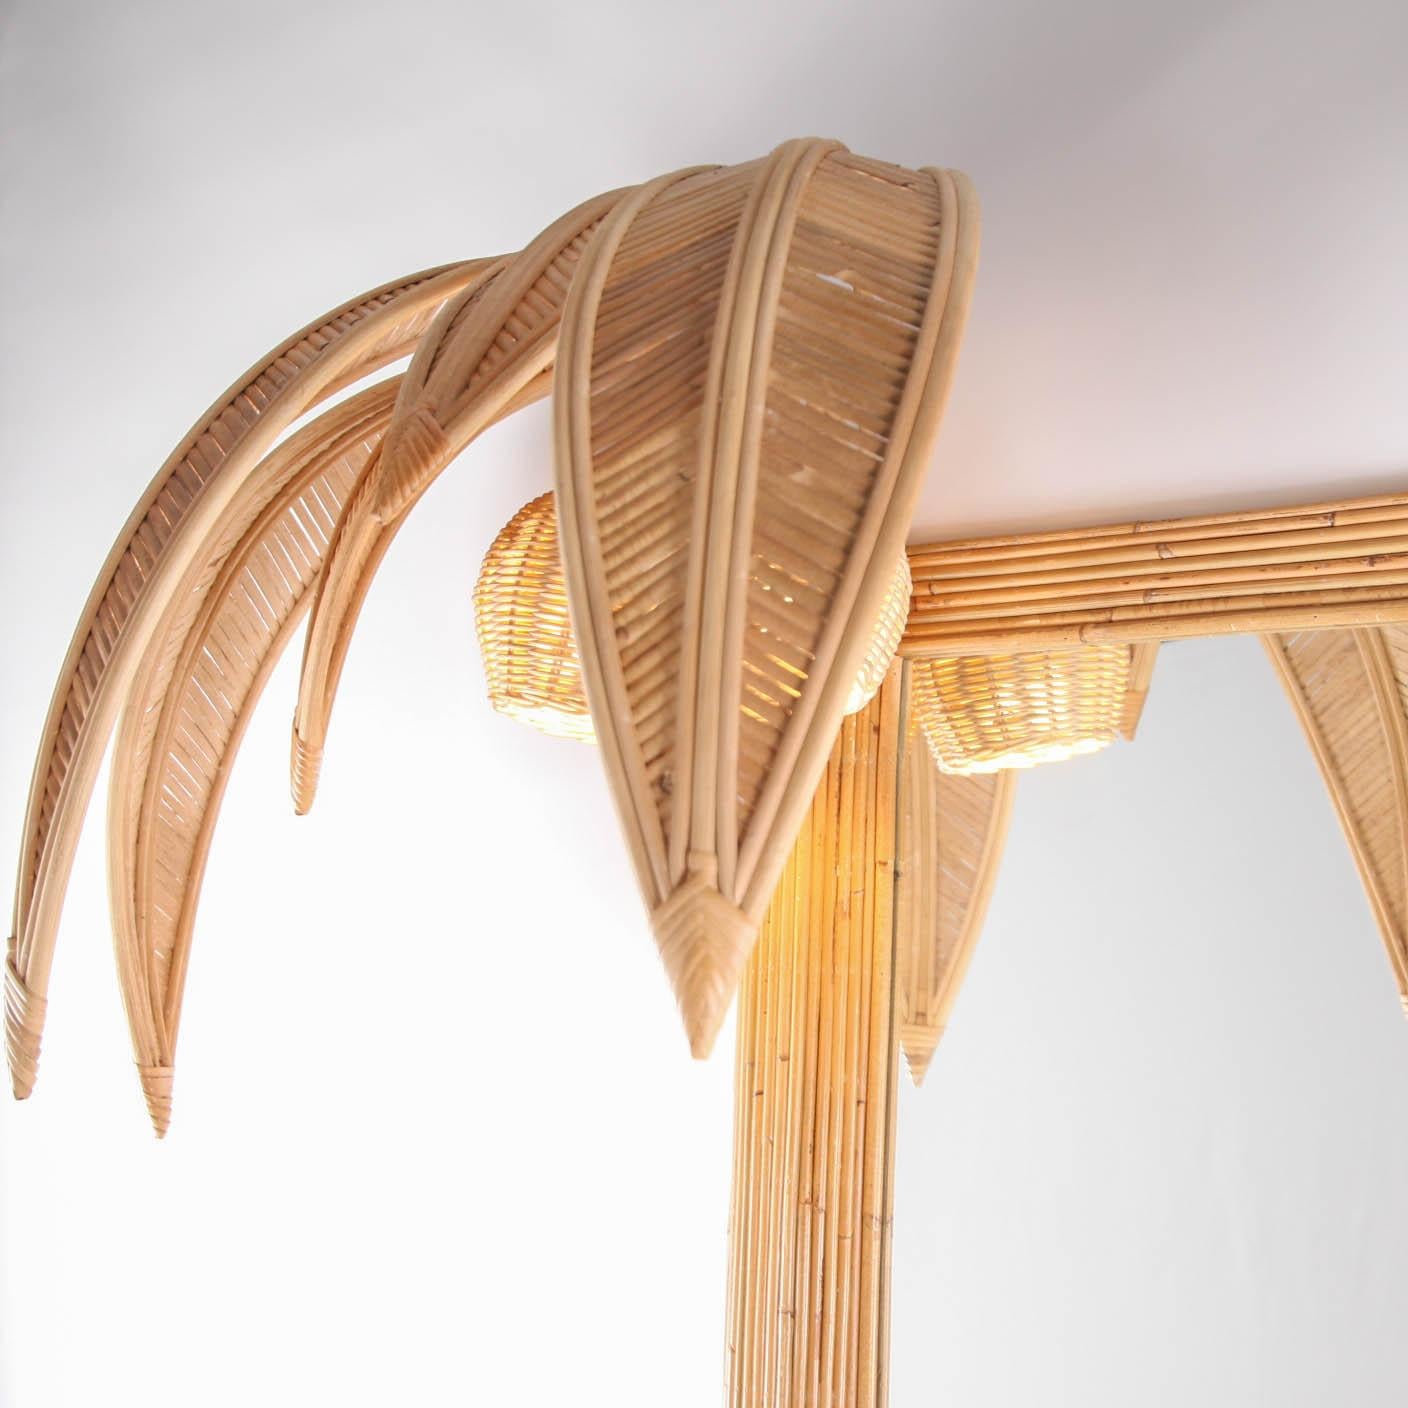 Rare rattan double coconut trees full-length mirror with 4 lights in the coconuts.
In the style of Mario Lopez Torres, Vivai del Sud, Maison Jansen.